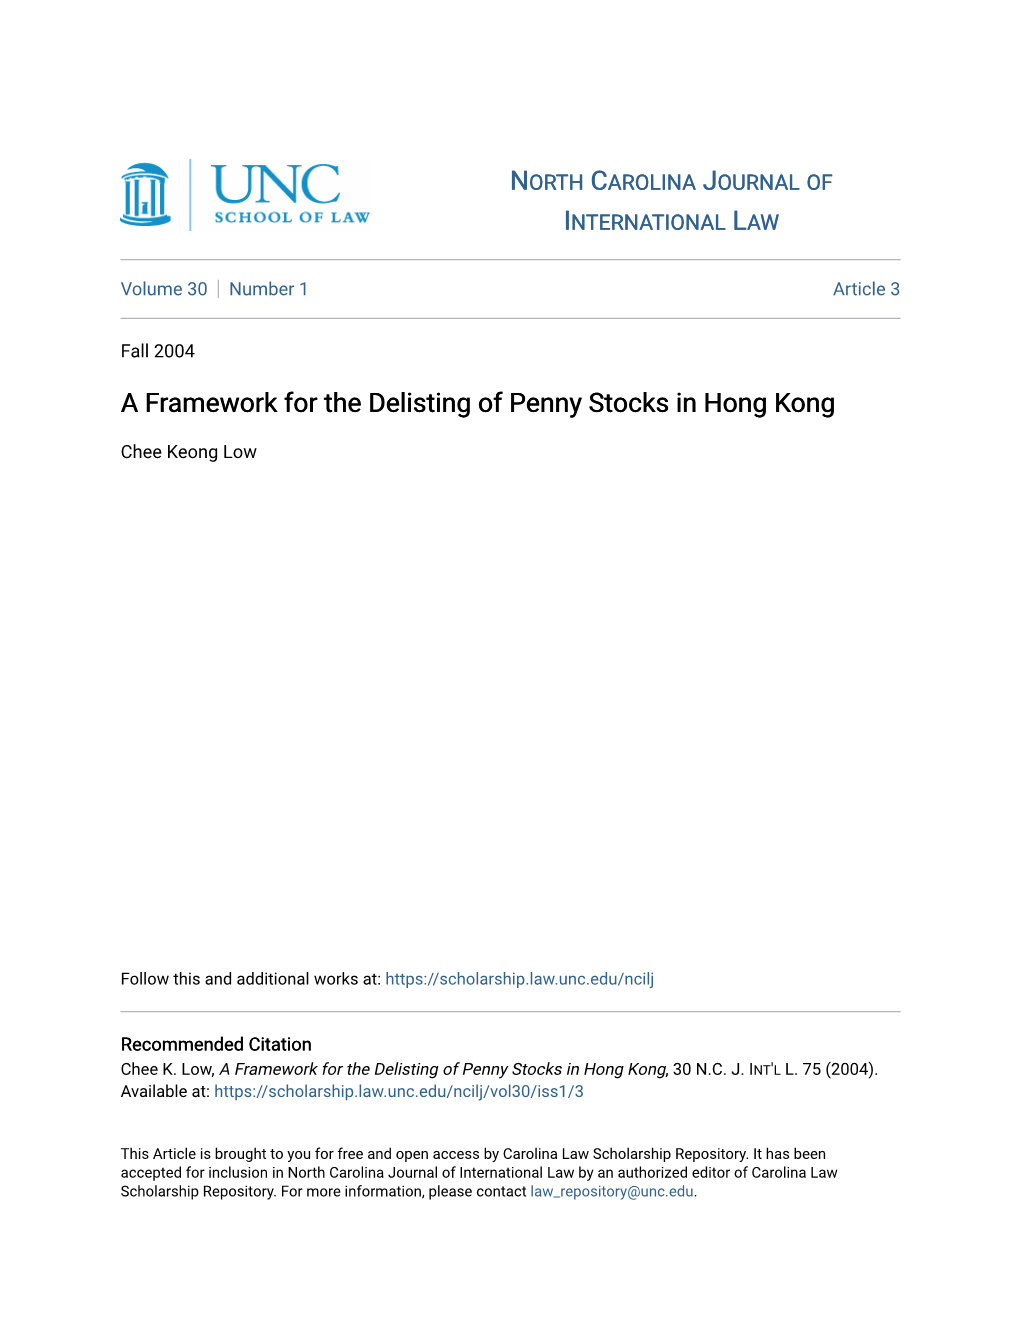 A Framework for the Delisting of Penny Stocks in Hong Kong